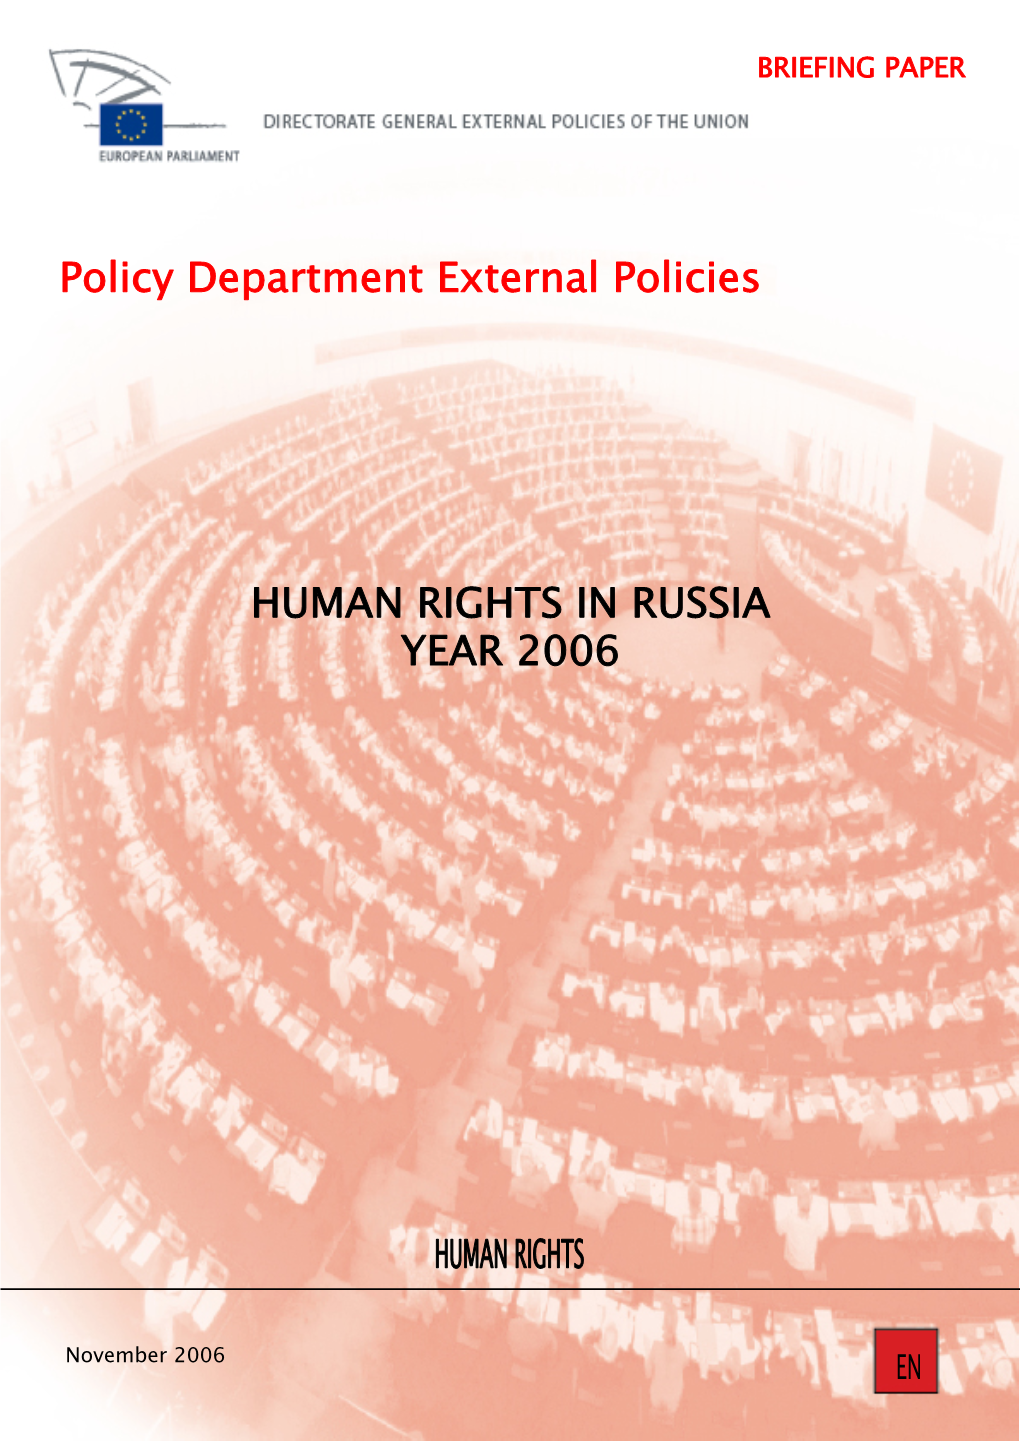 Policy Department External Policies HUMAN RIGHTS in RUSSIA YEAR